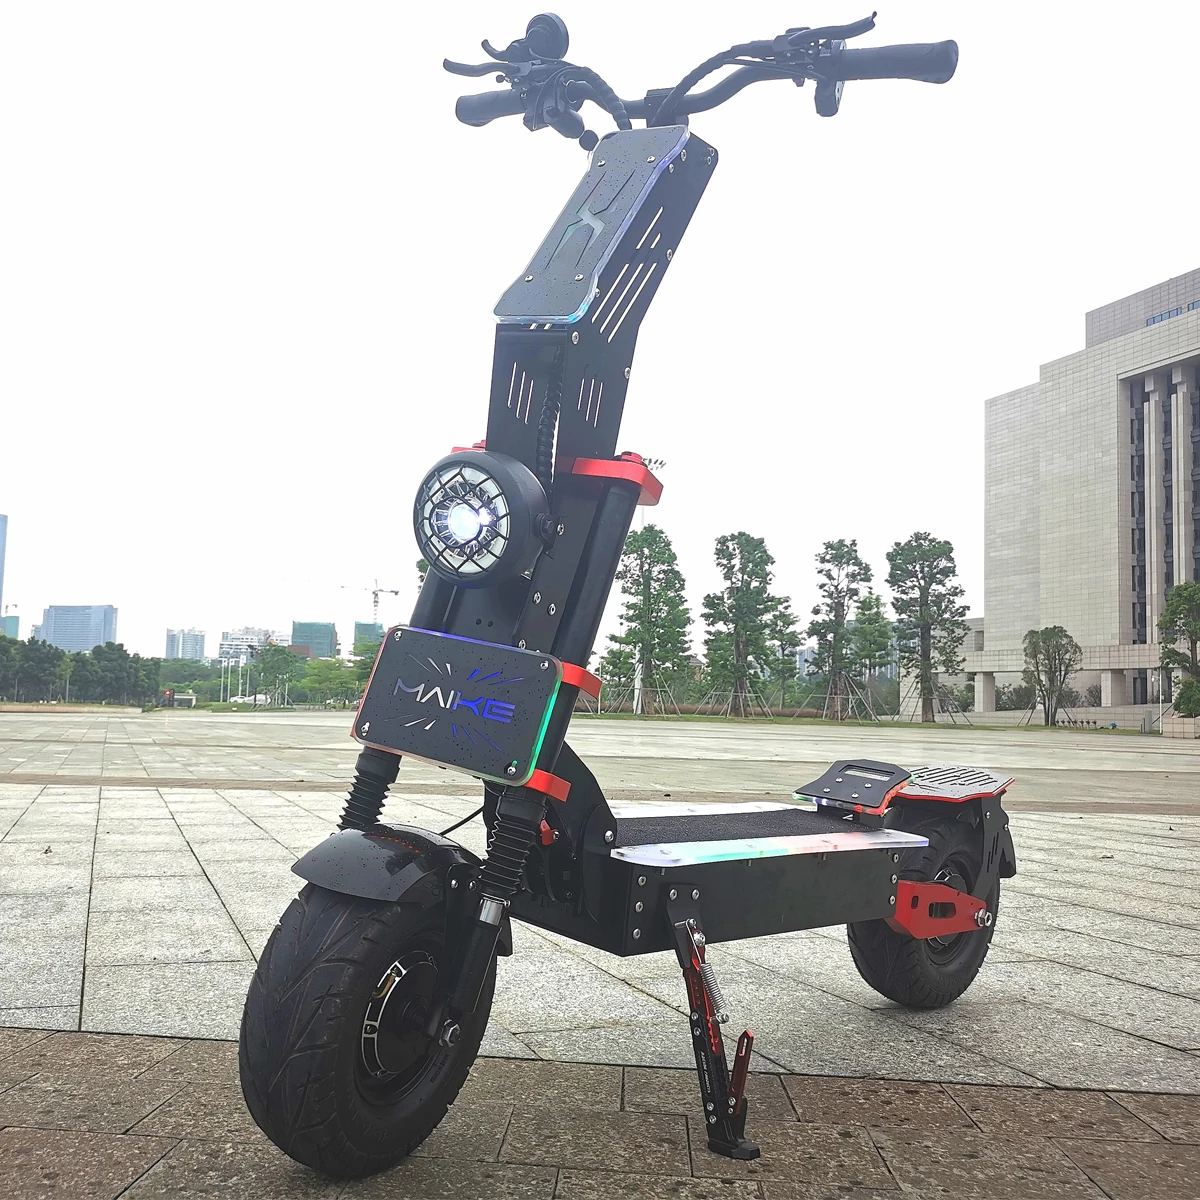 

High Quality Cheap price maike mkx e scooter dual motor 8000w high speed long range 100km electric scooter for adults